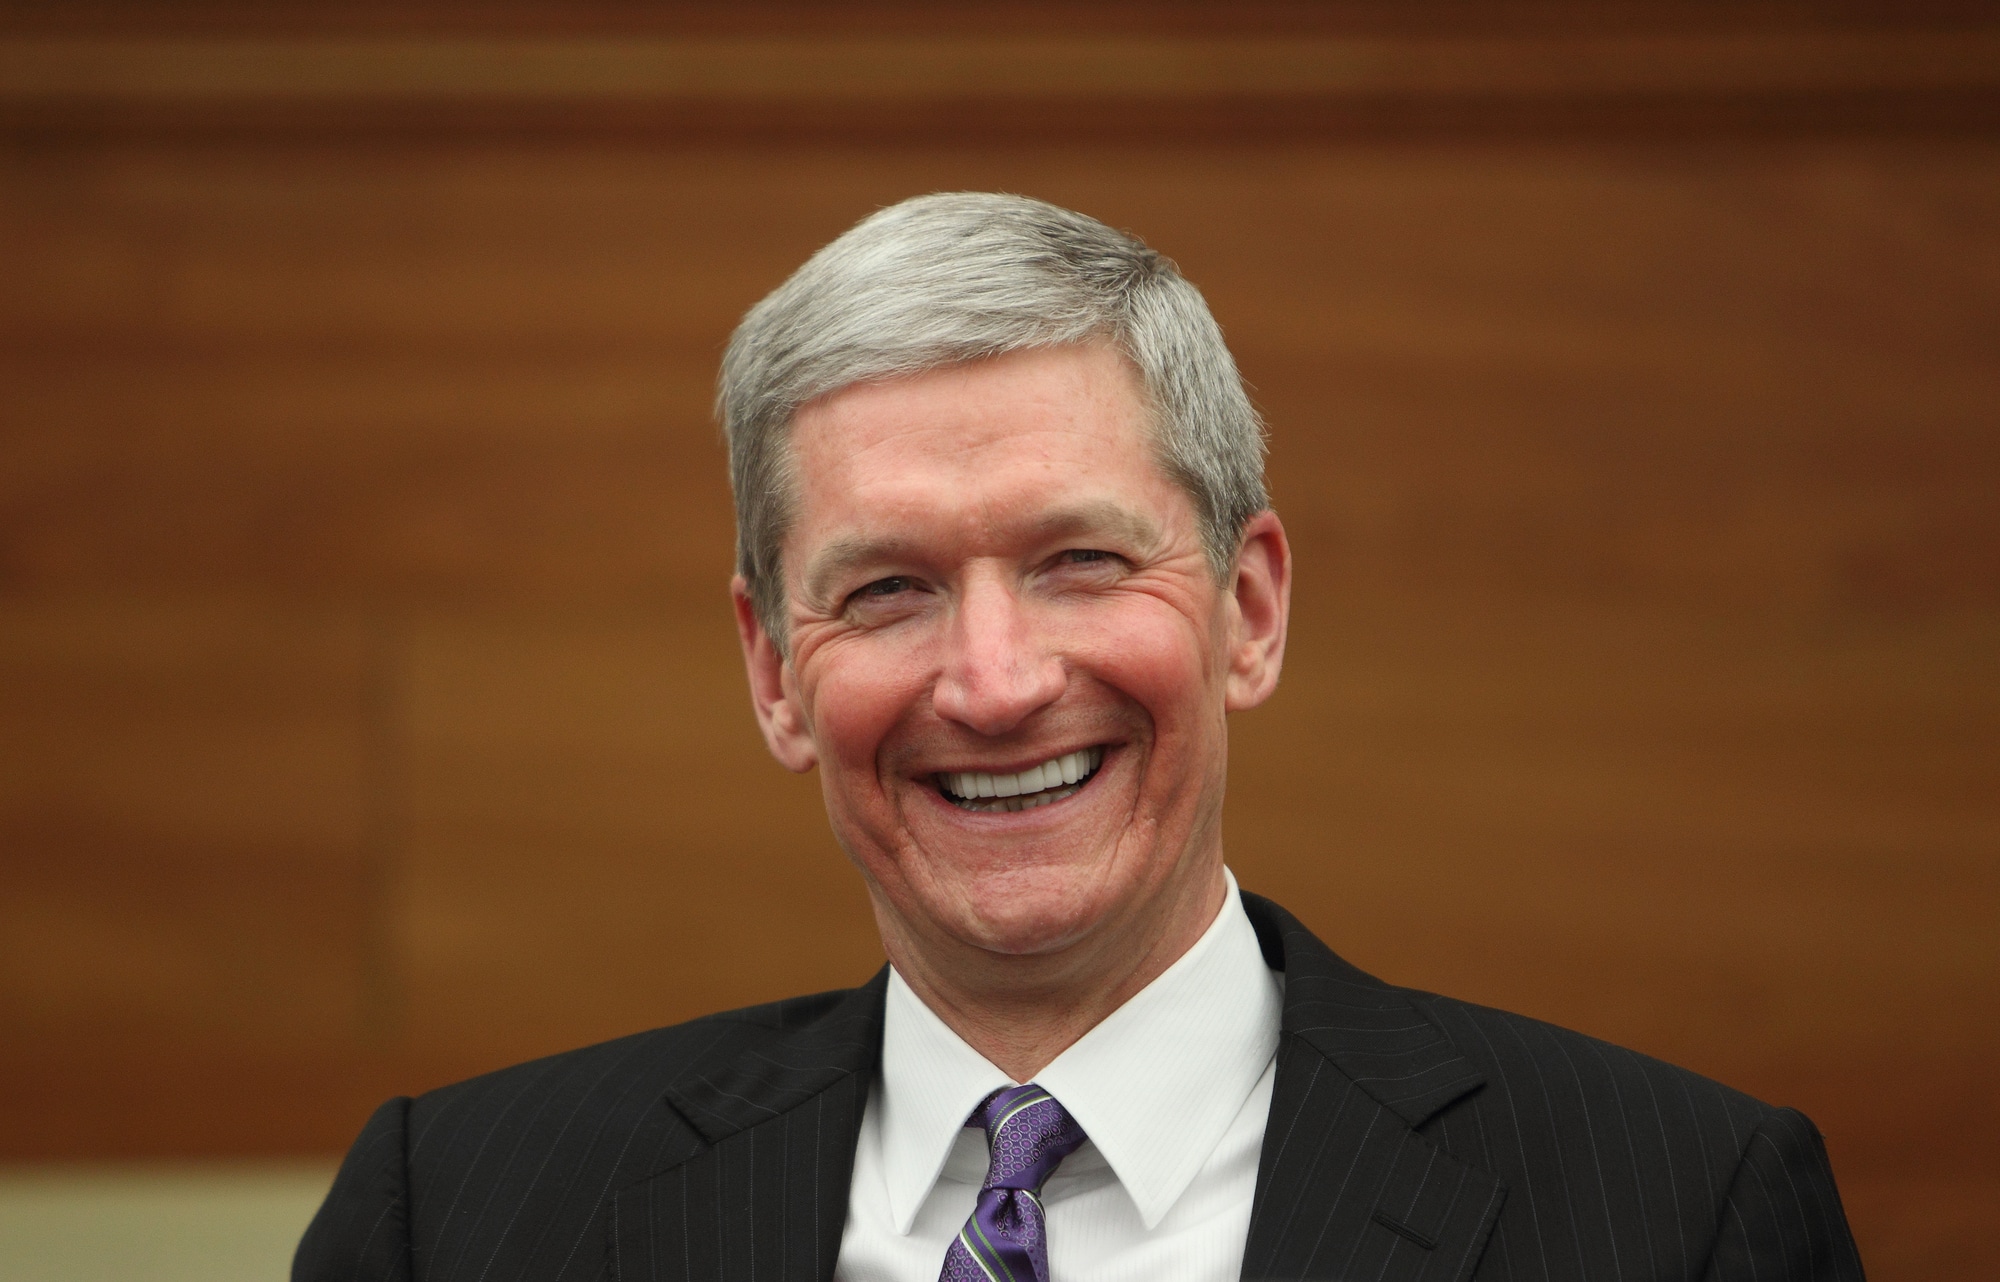 Apple's Tim Cook was named on the Time 100 list for 2022 thumbnail